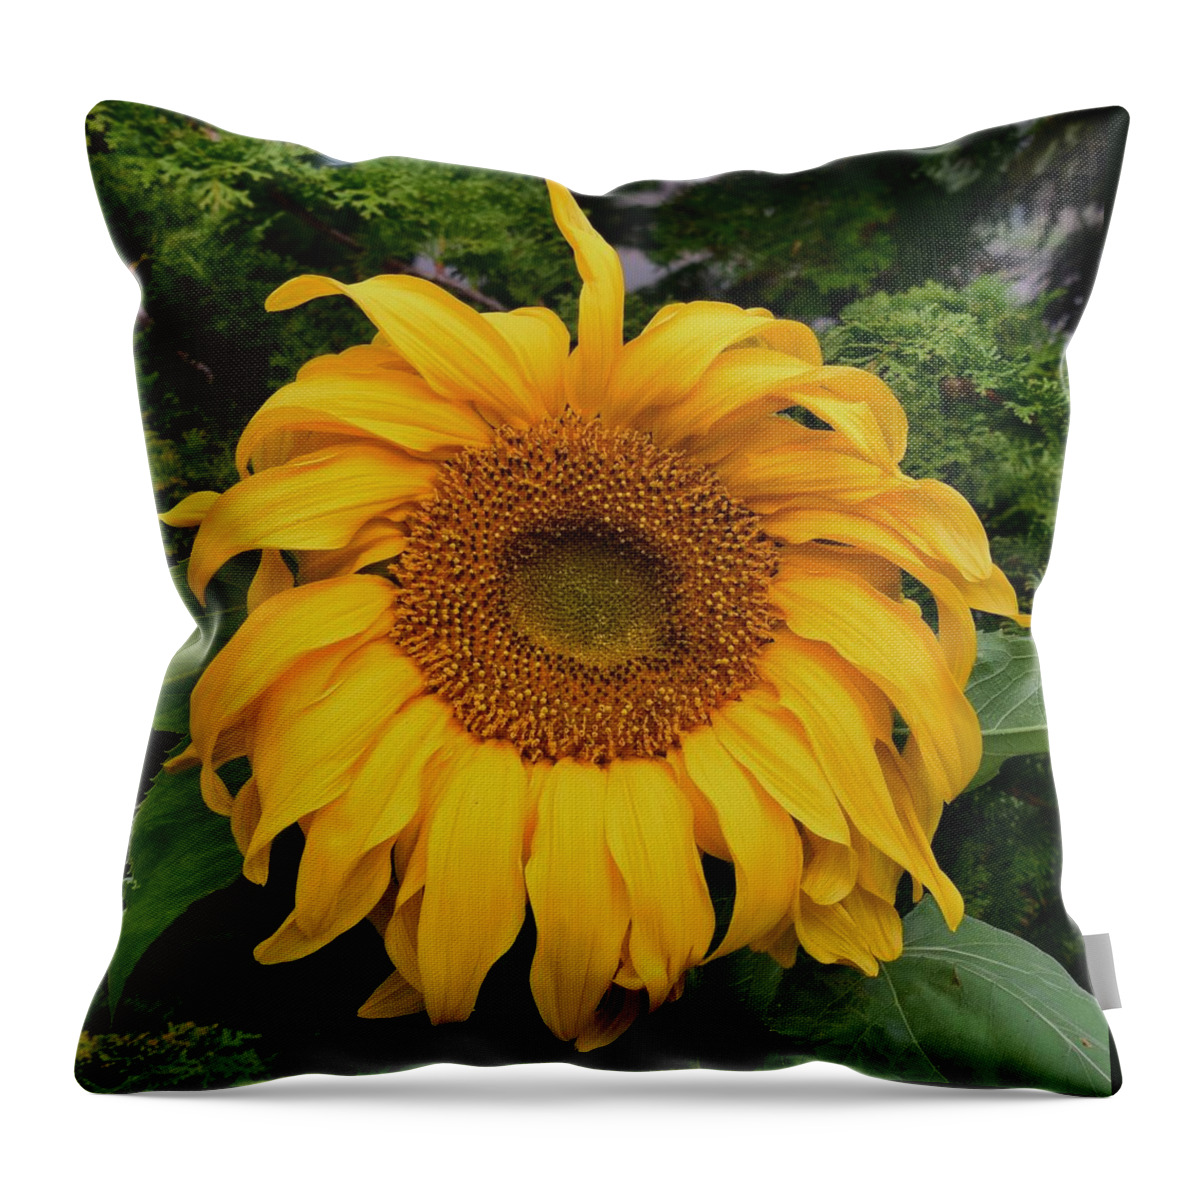 Sunflower Throw Pillow featuring the photograph Sunflower #1 by Jimmy Chuck Smith